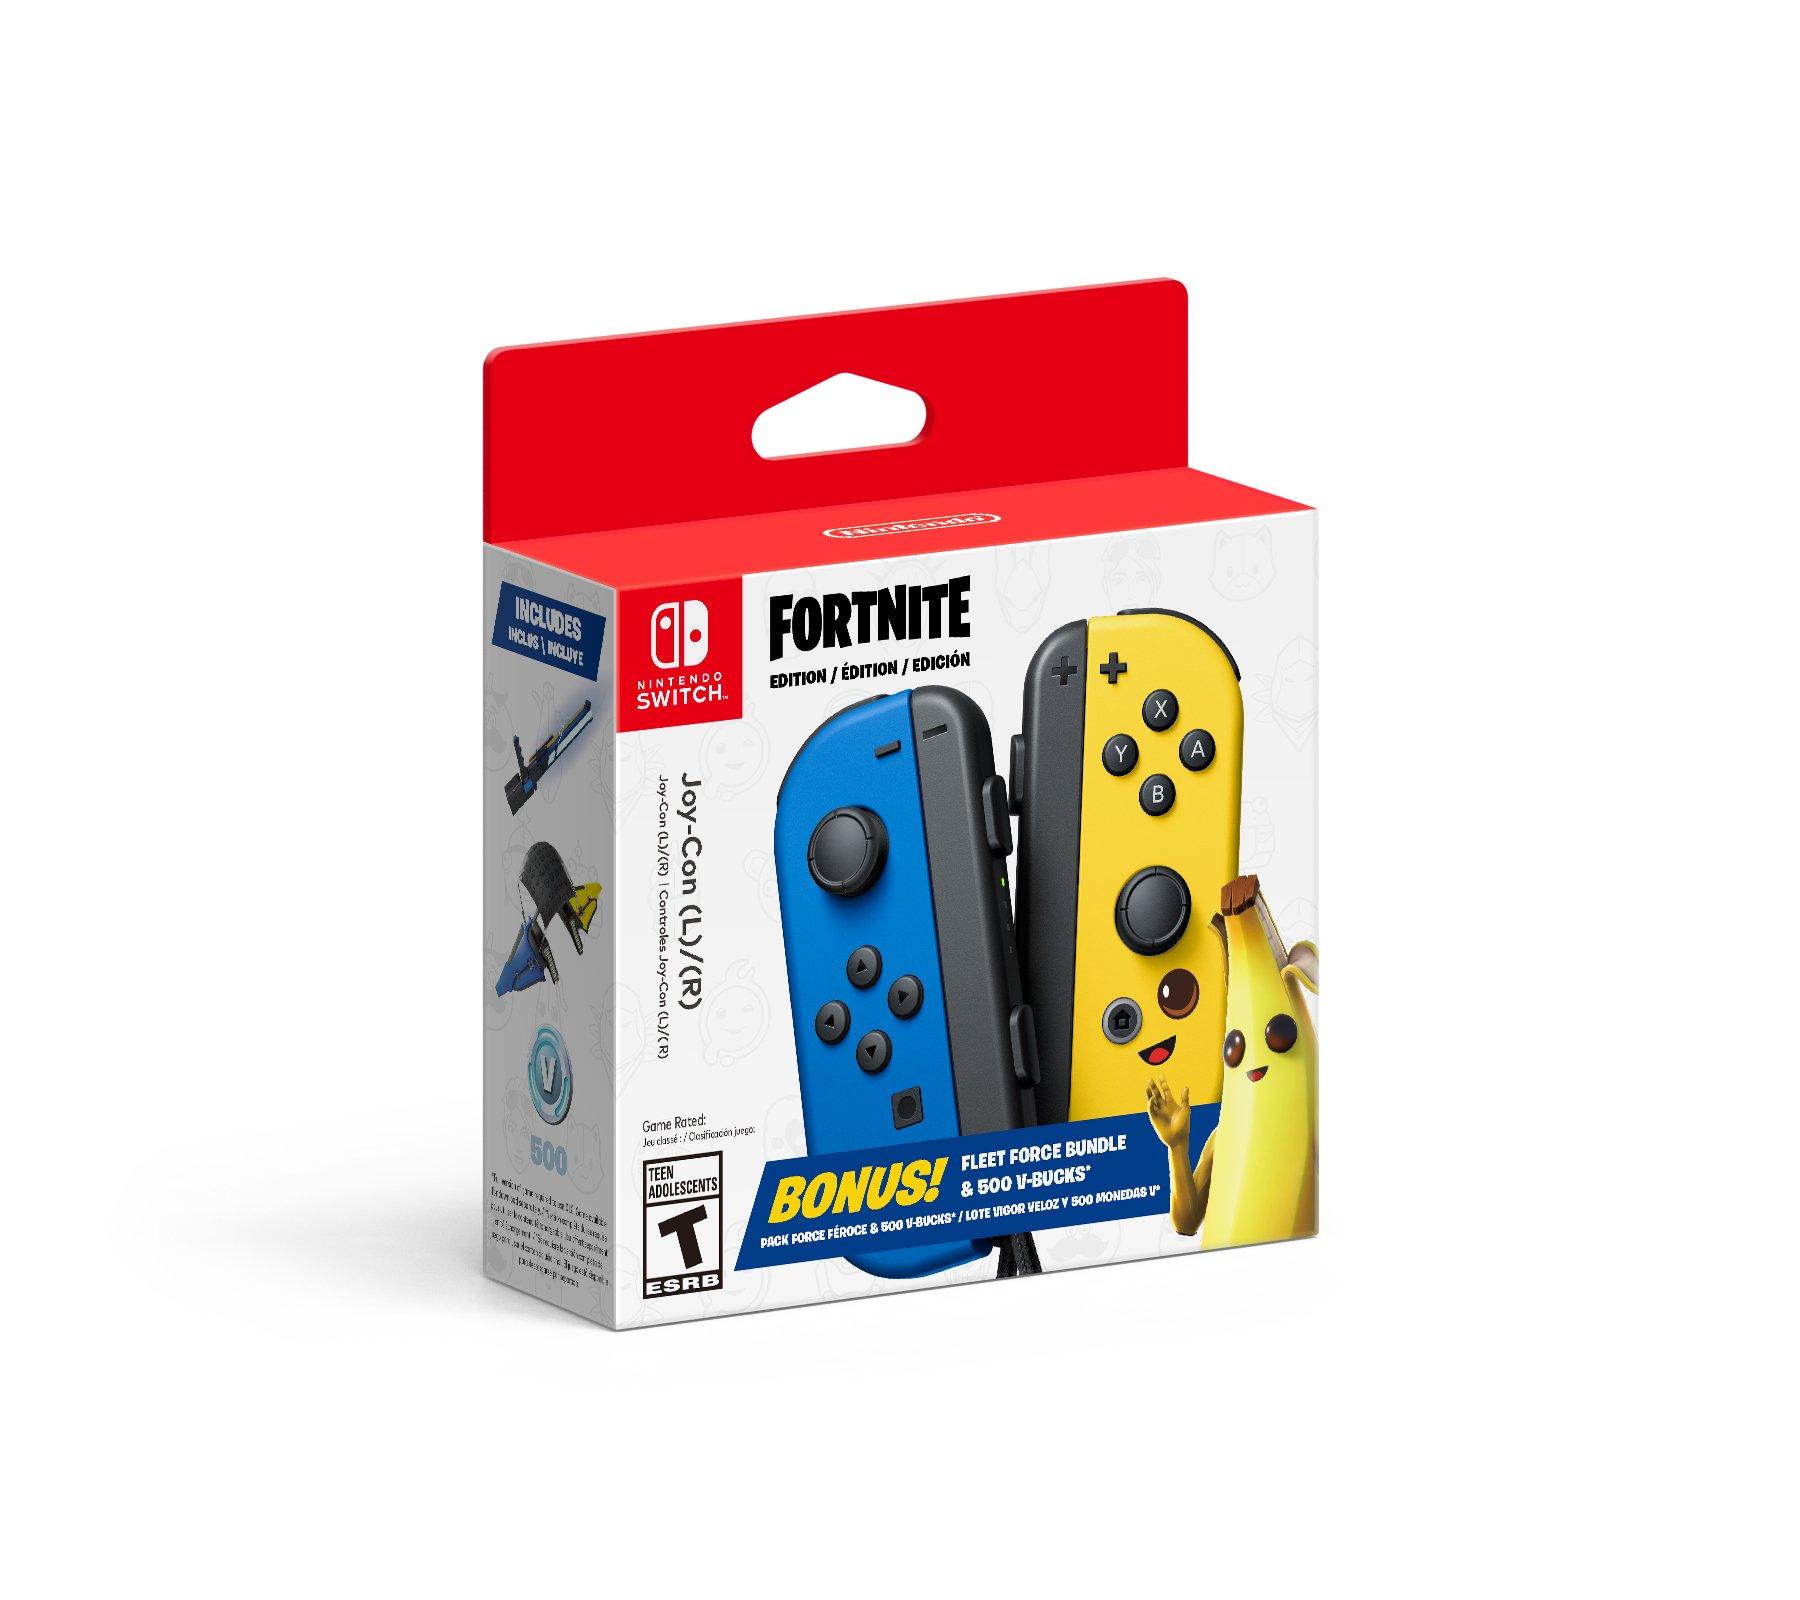 What Does The Nintendo Switch Fortnite Bundle Come With Nintendo Switch Joy Con L R Fortnite Fleet Force Bundle Nintendo Switch Gamestop